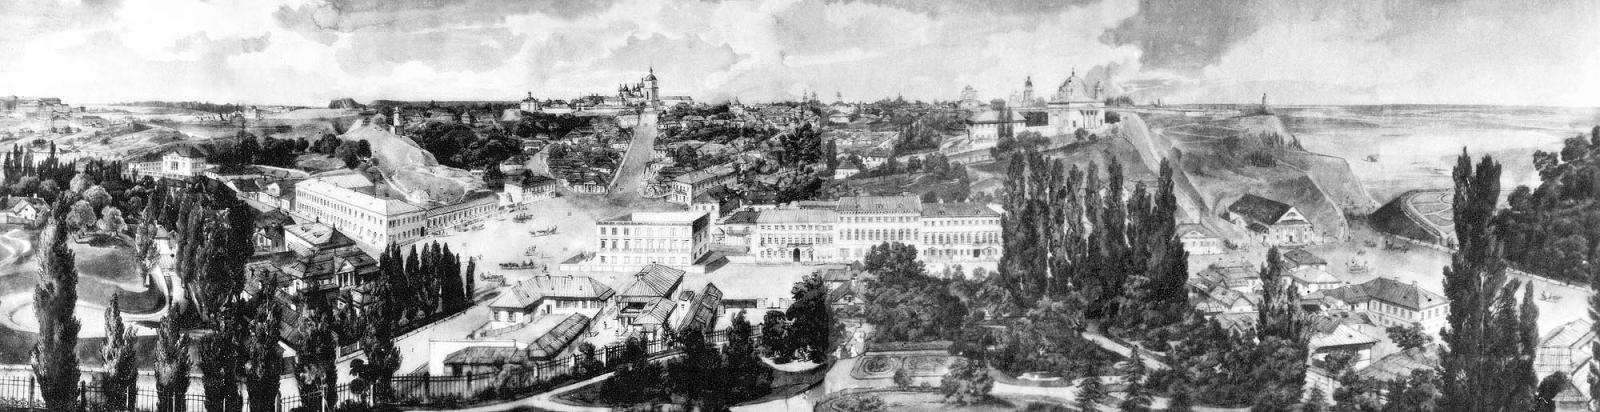 The Maidan, Khreschatyk Street and the St. Sophia and St. Michael's complexes in 19th Century Kyiv. 